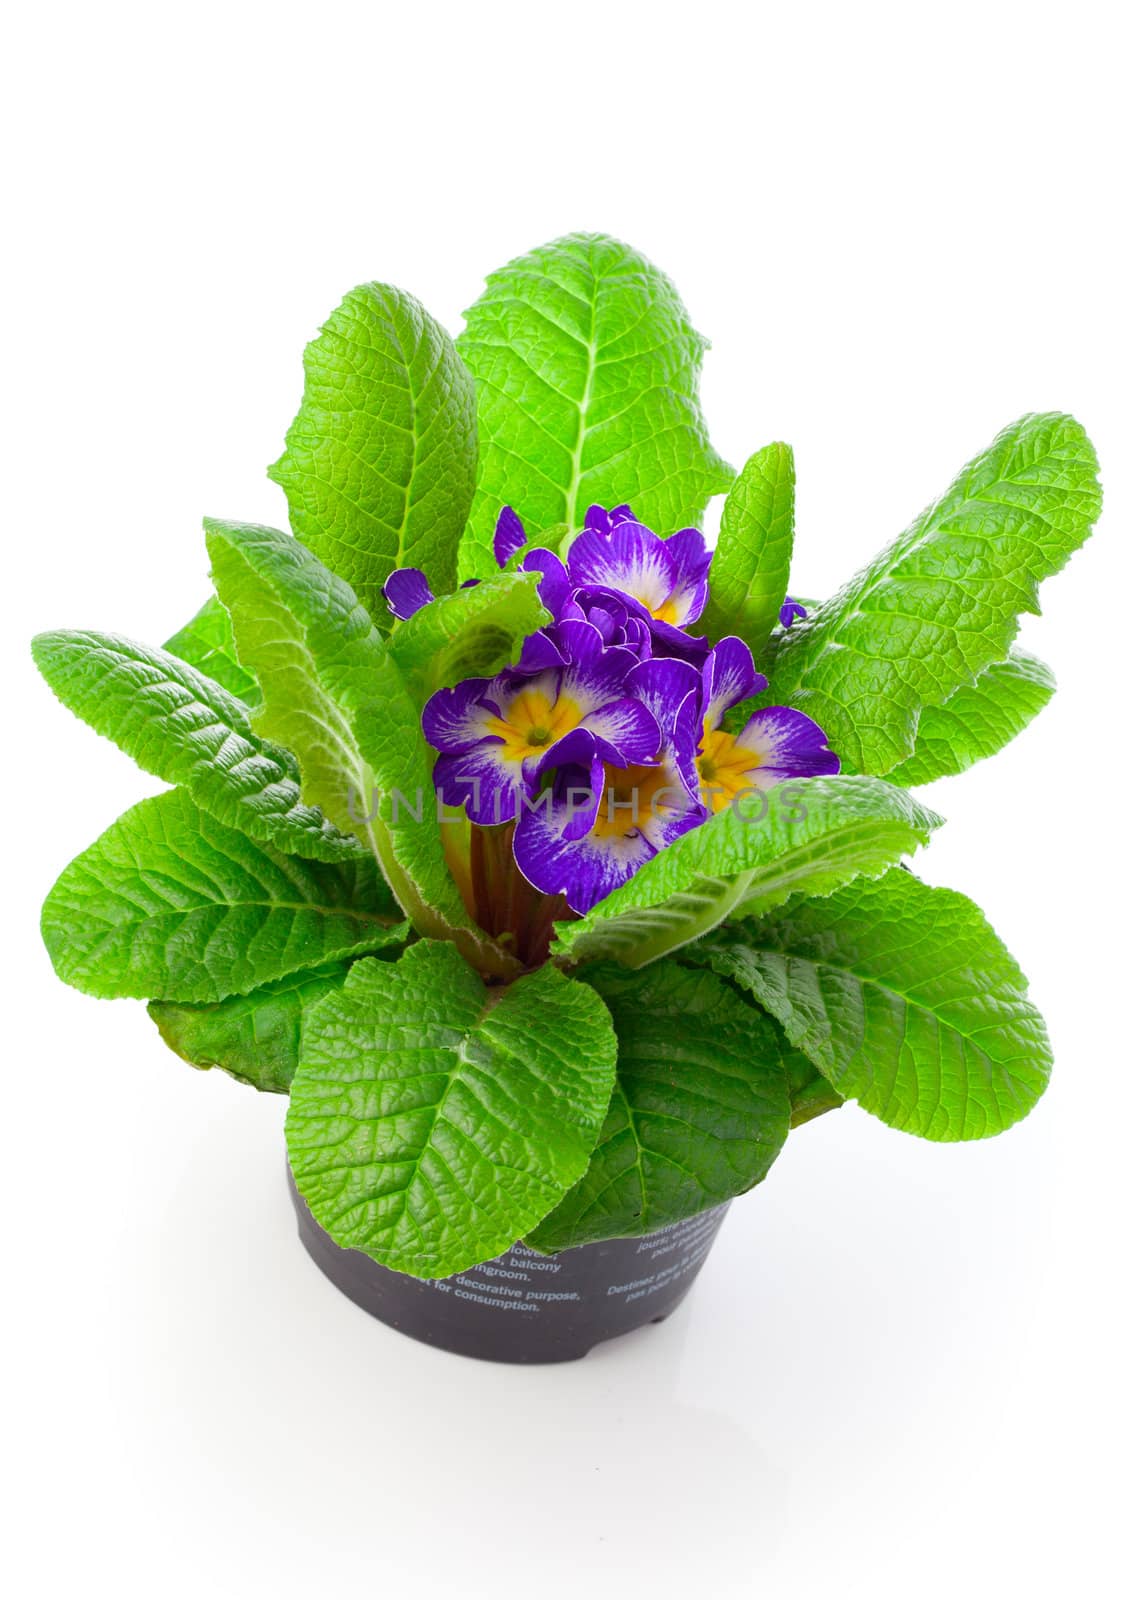 violet primula isolated over white background